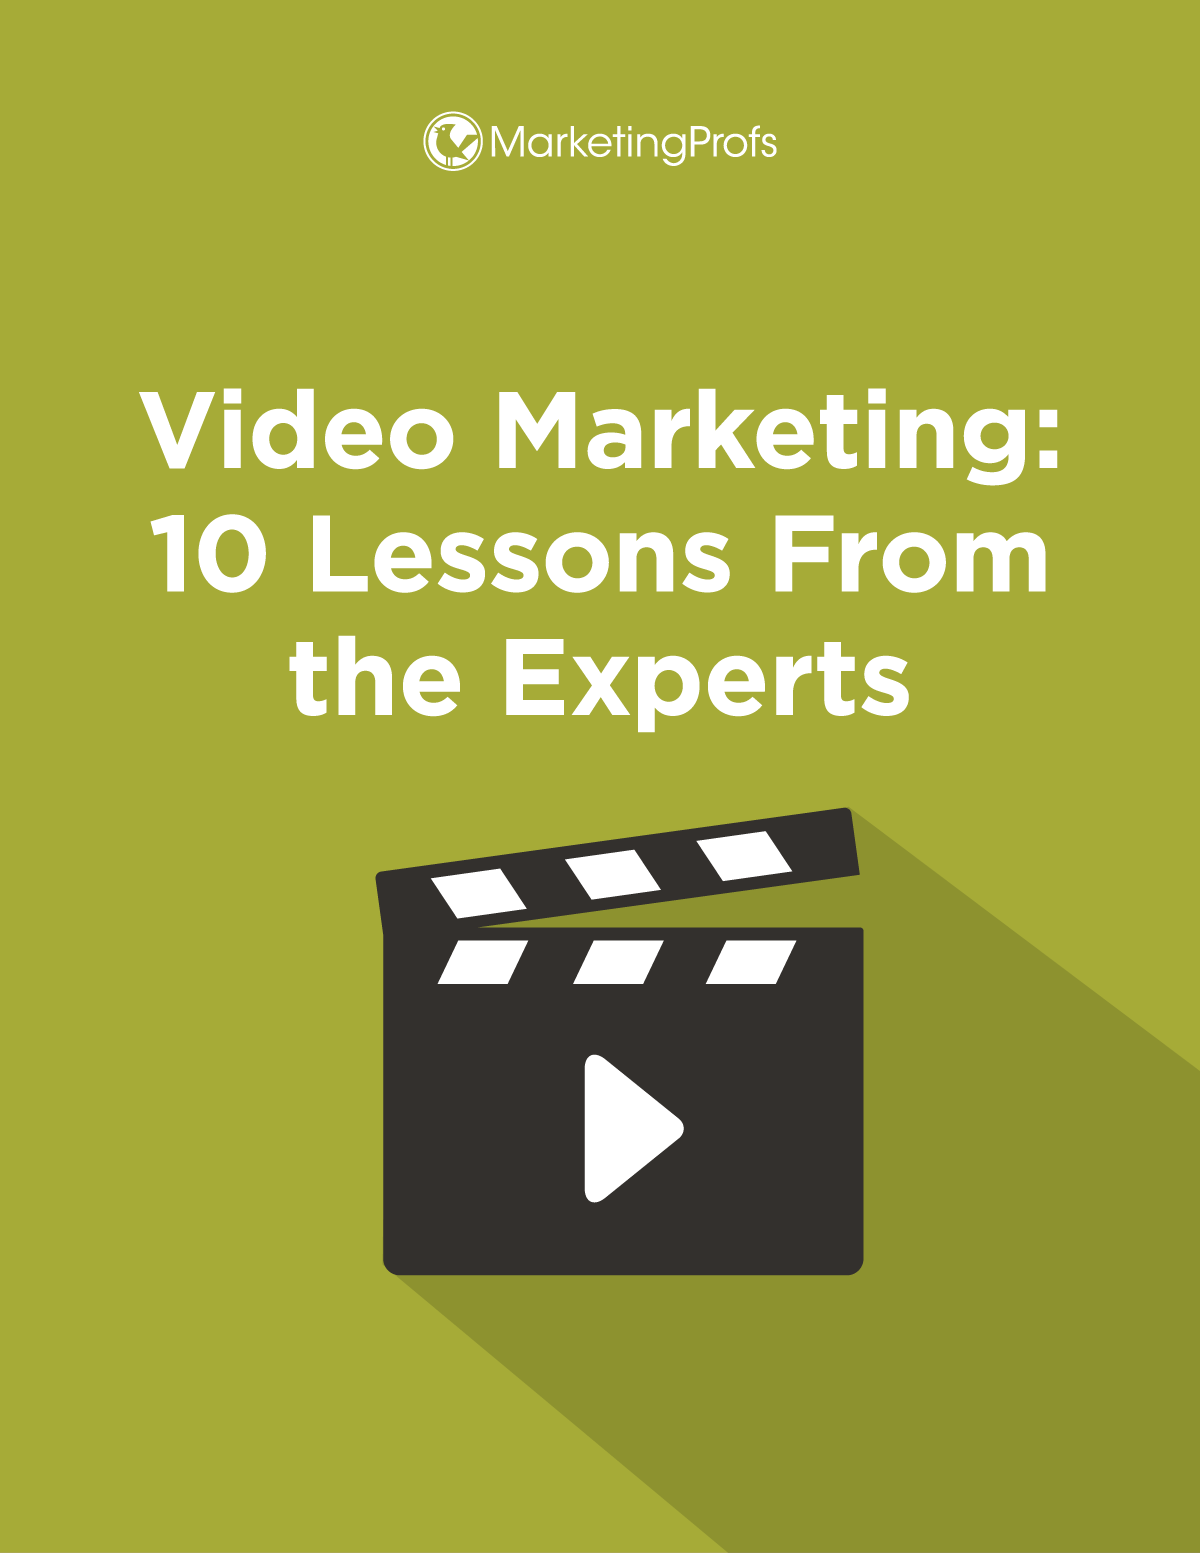 Video Marketing: 10 Lessons From the Experts